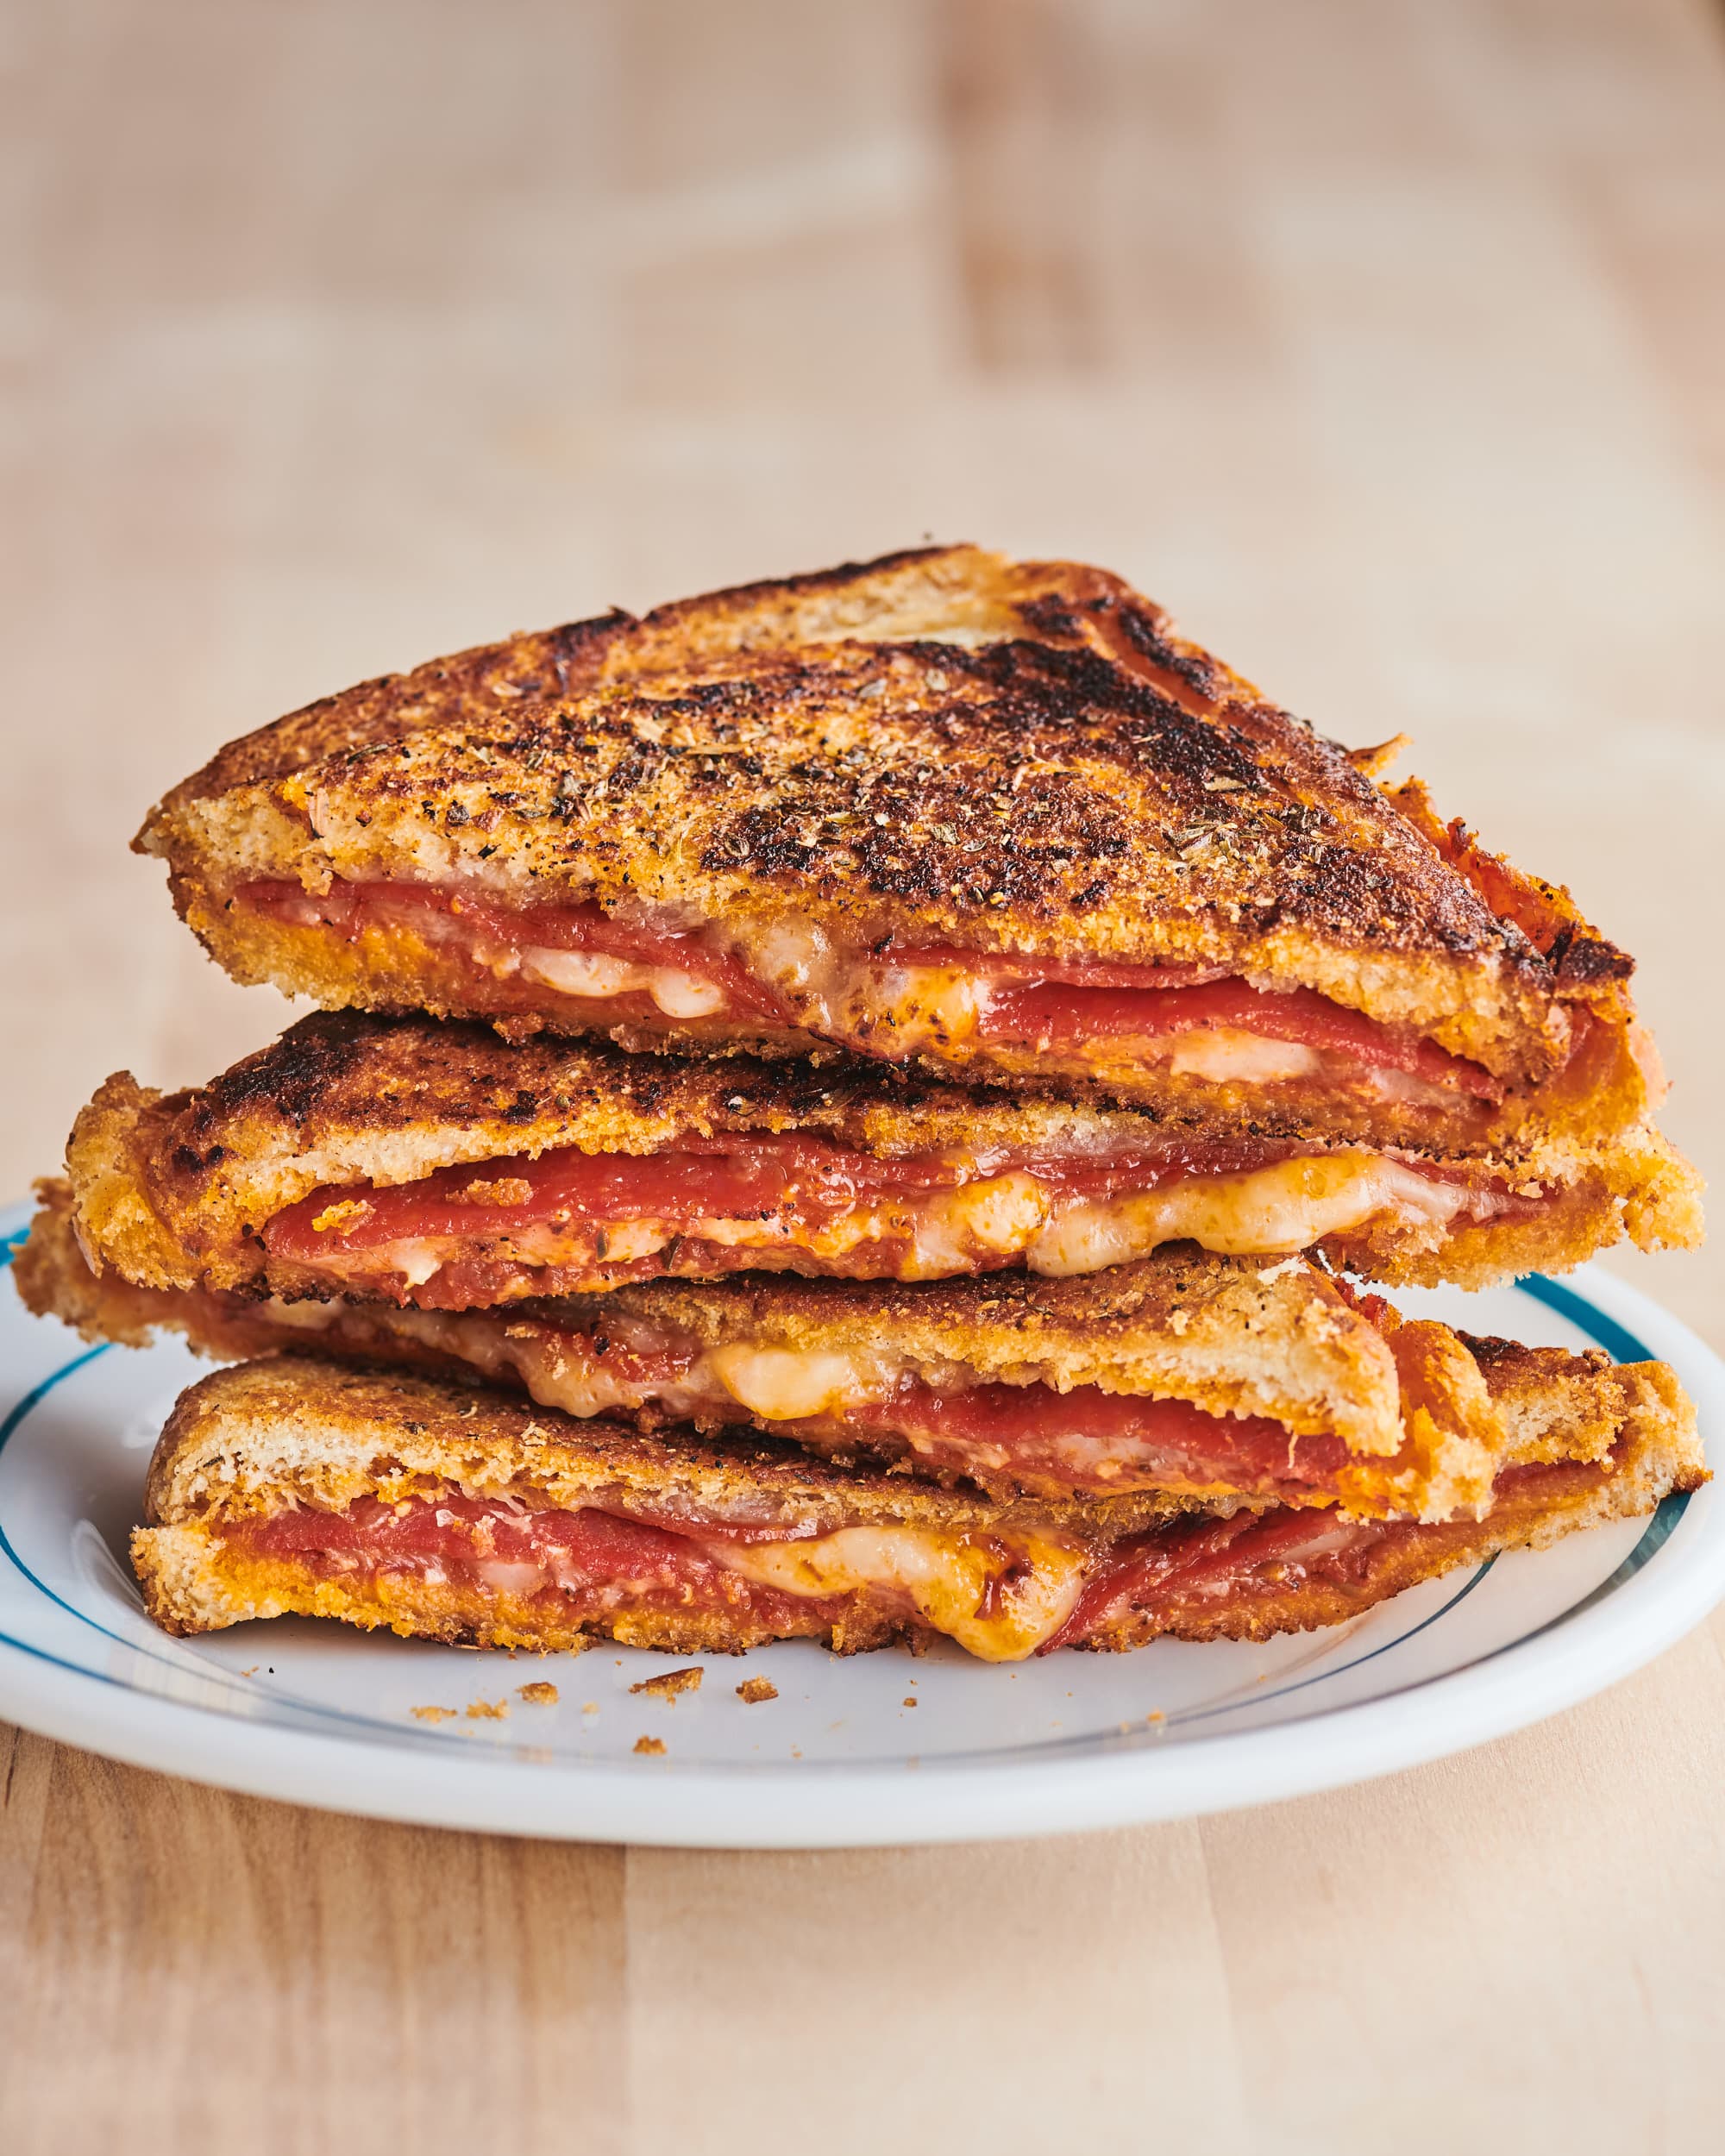 https://cdn.apartmenttherapy.info/image/upload/v1598041931/k/Photo/Recipes/2020-09-Cast-Iron-Pressed-Pizza-Sandwich/Cast-Iron-Pressed-Pizza-Sandwiches176.jpg